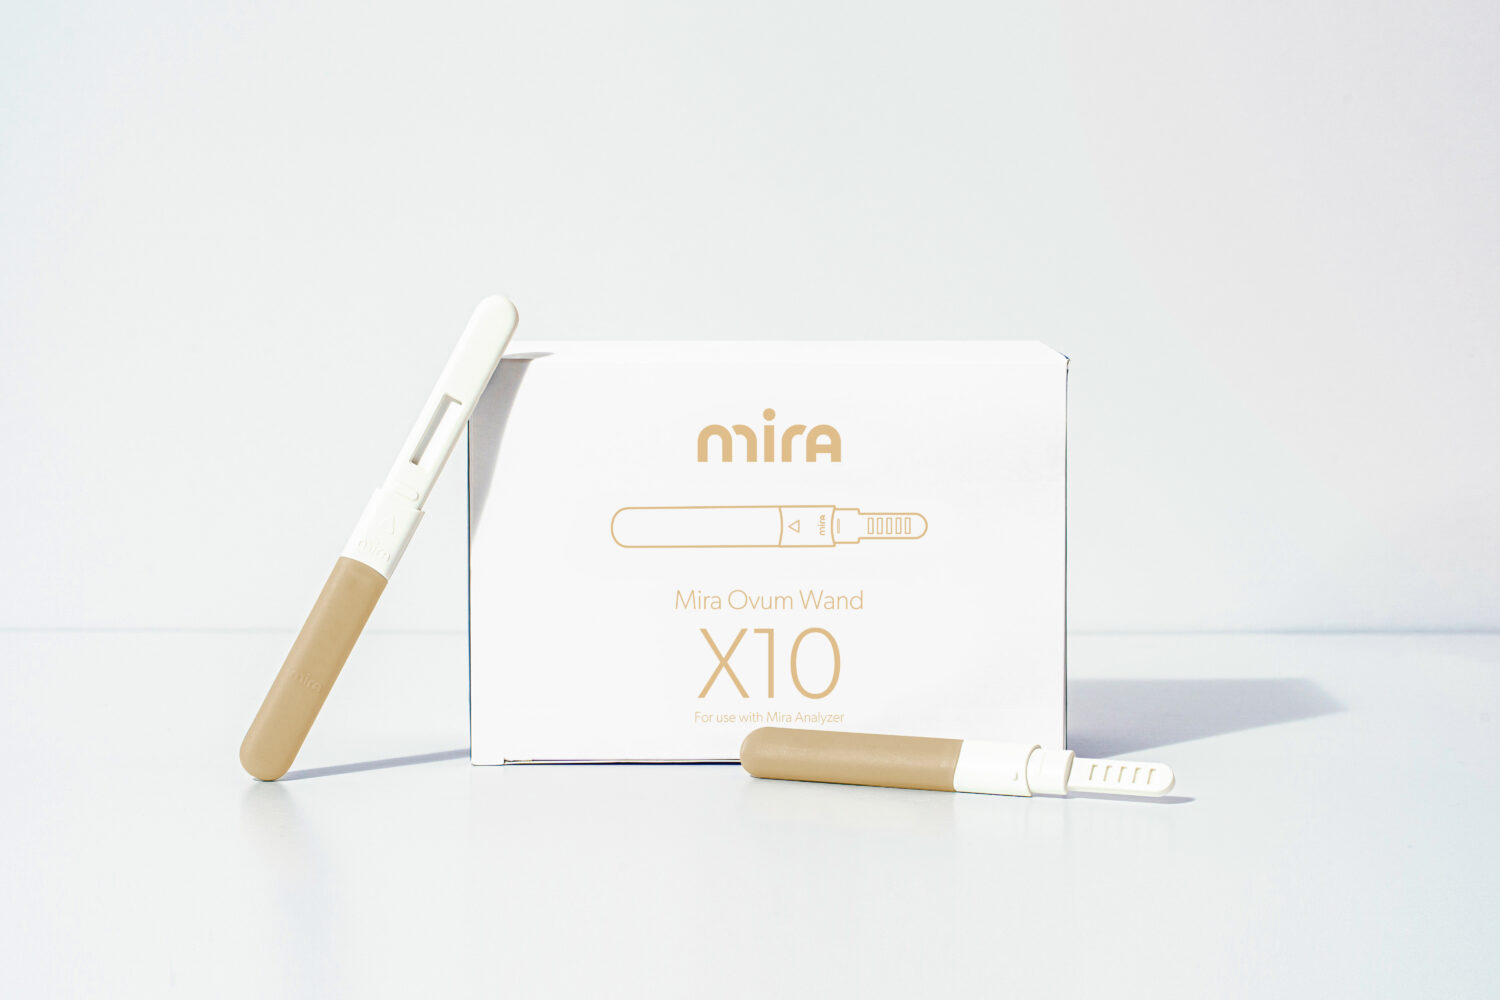 Mira Launches Ovum Wand to Predict Menopause and Monitor Fertility Status